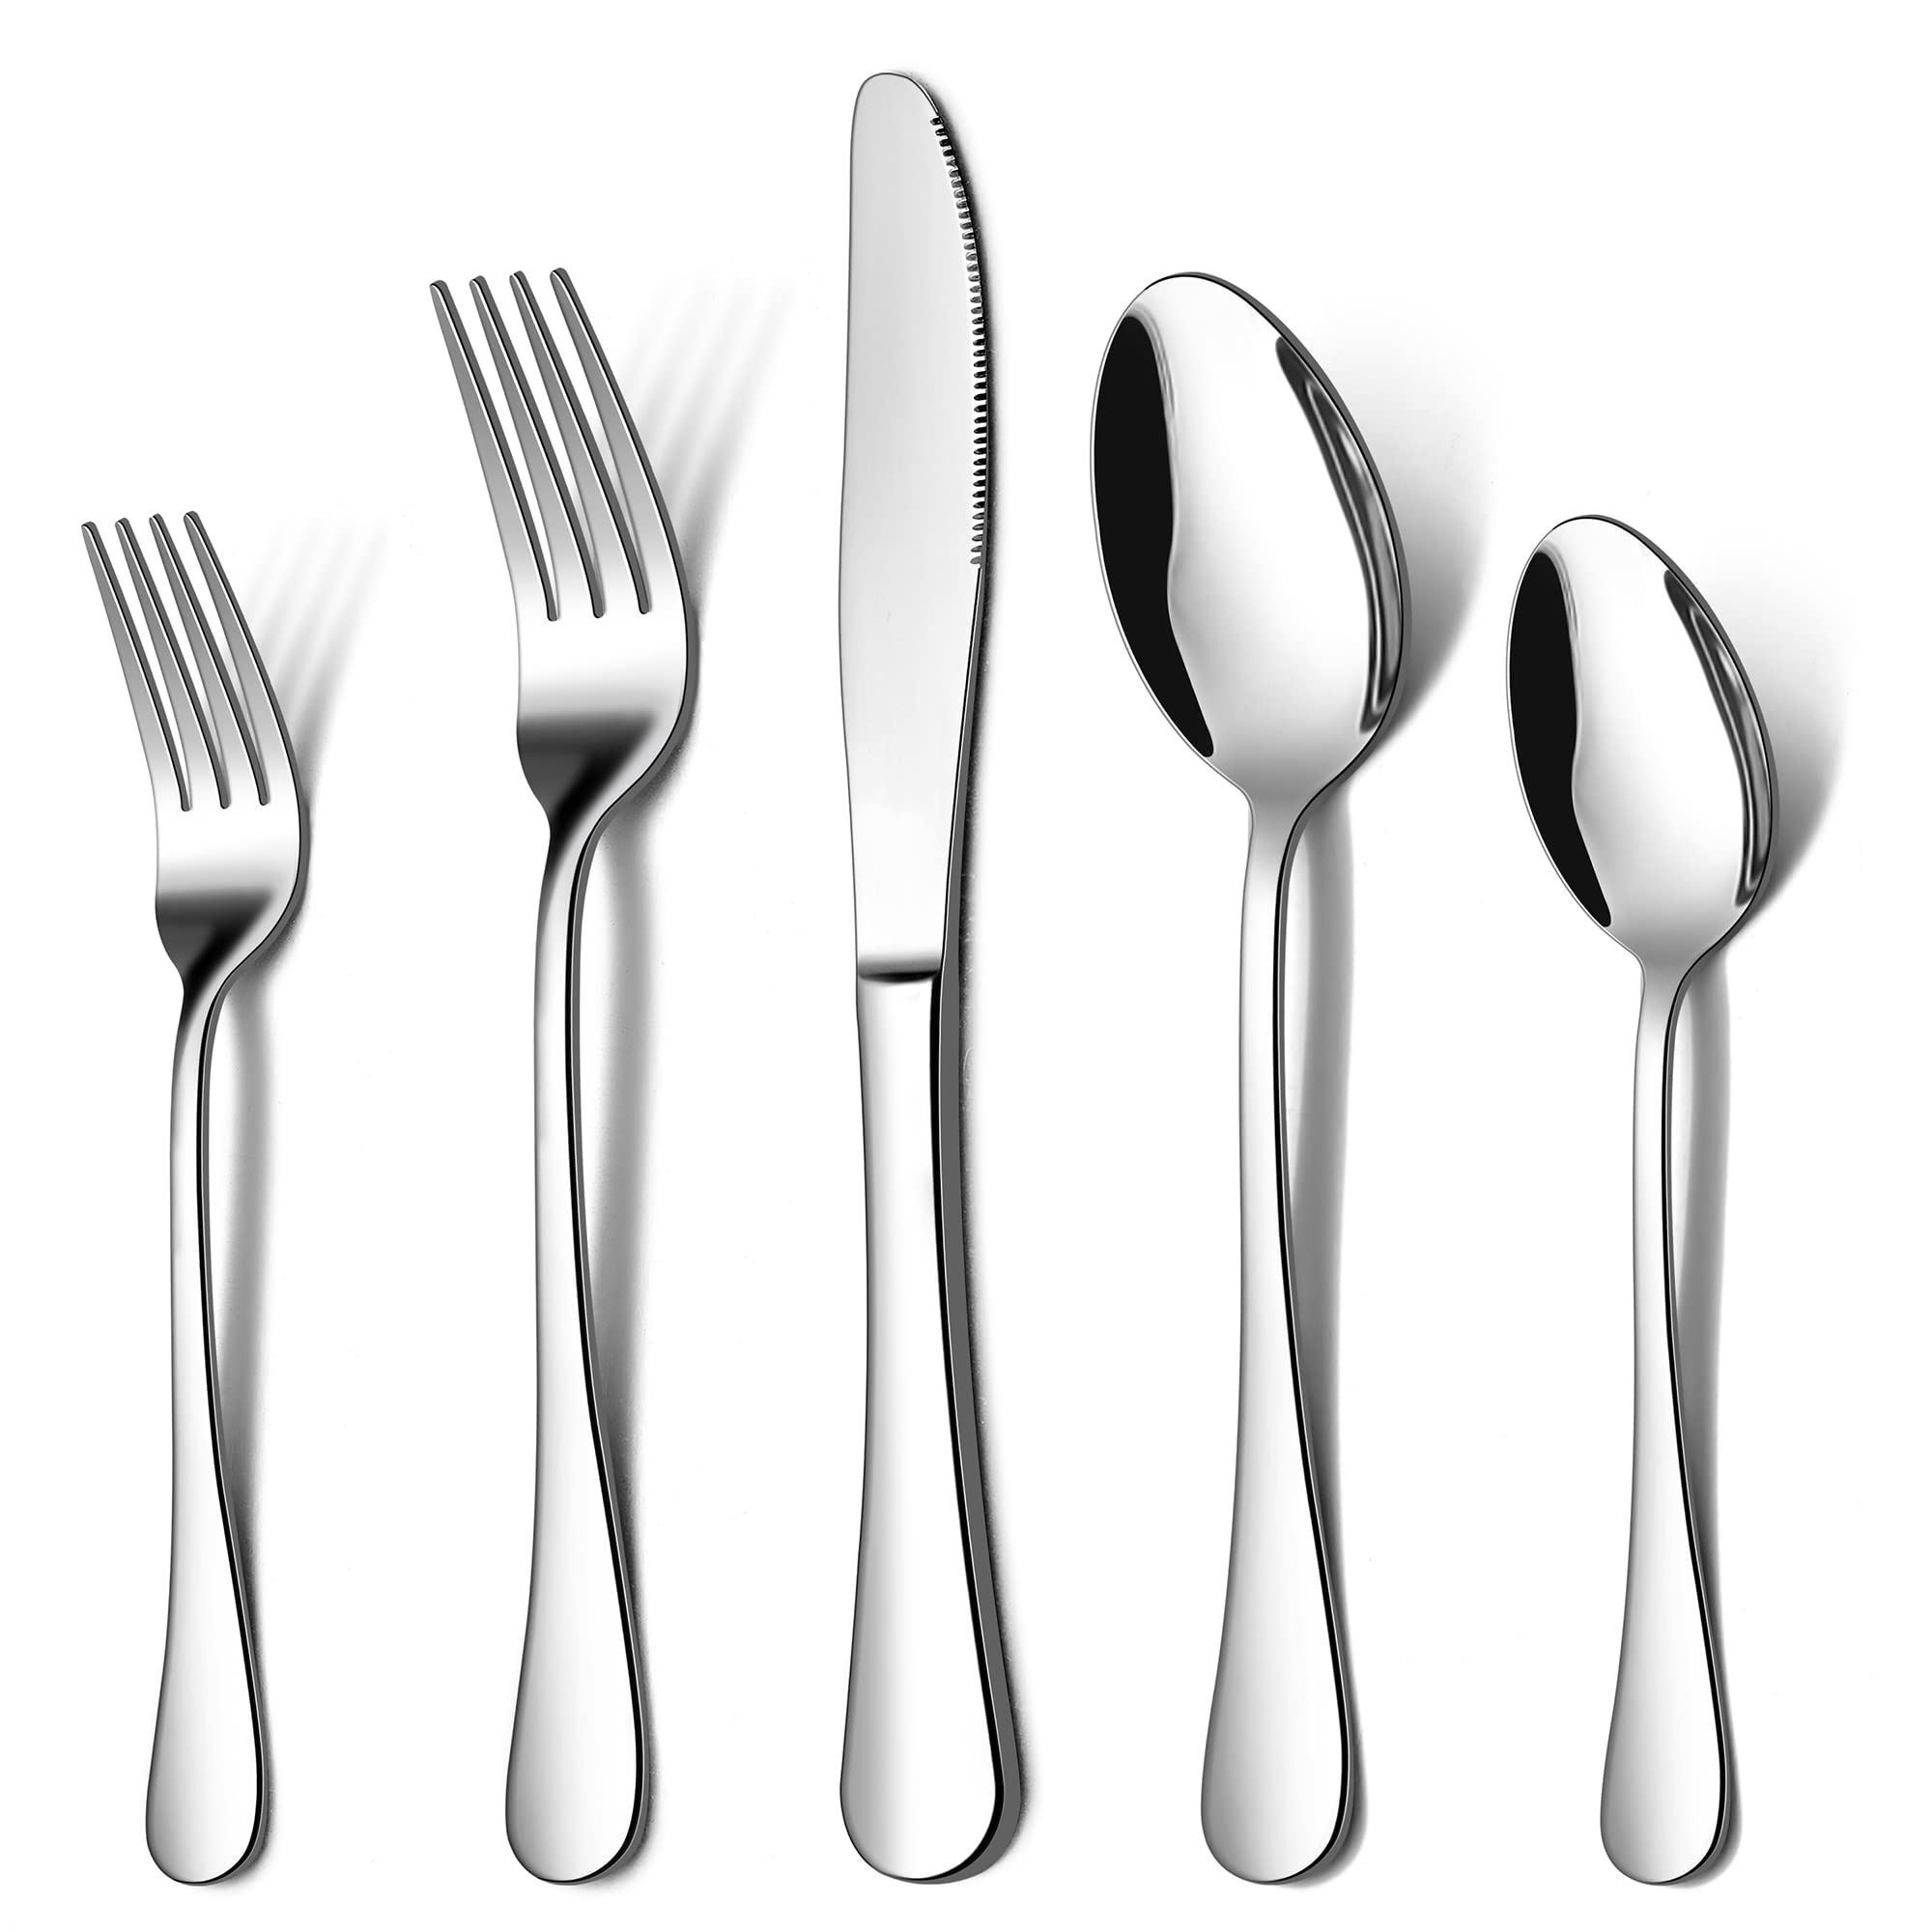 Book Cover LIANYU 20 Piece Silverware Flatware Cutlery Set, Stainless Steel Utensils Service for 4, Include Knife Fork Spoon, Mirror Polished, Dishwasher Safe